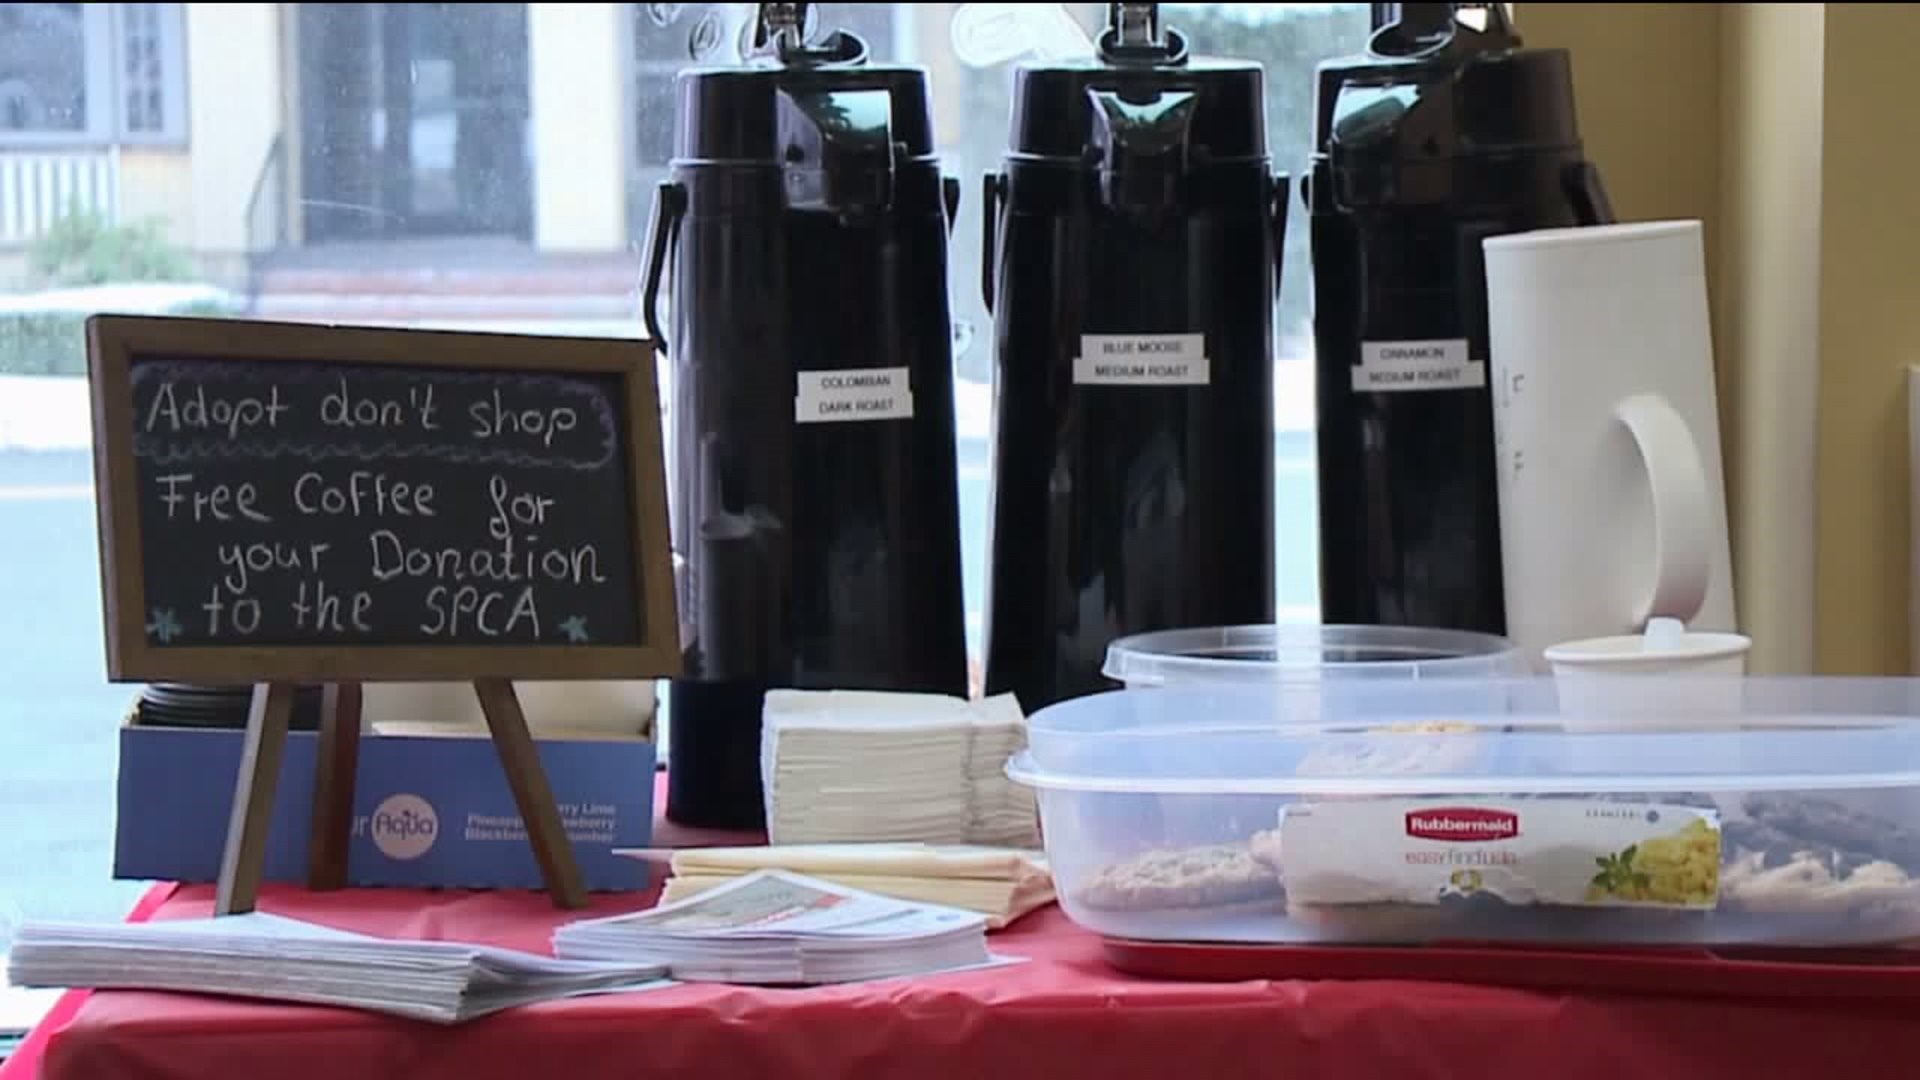 Coffee Served Up for Donations to the SPCA